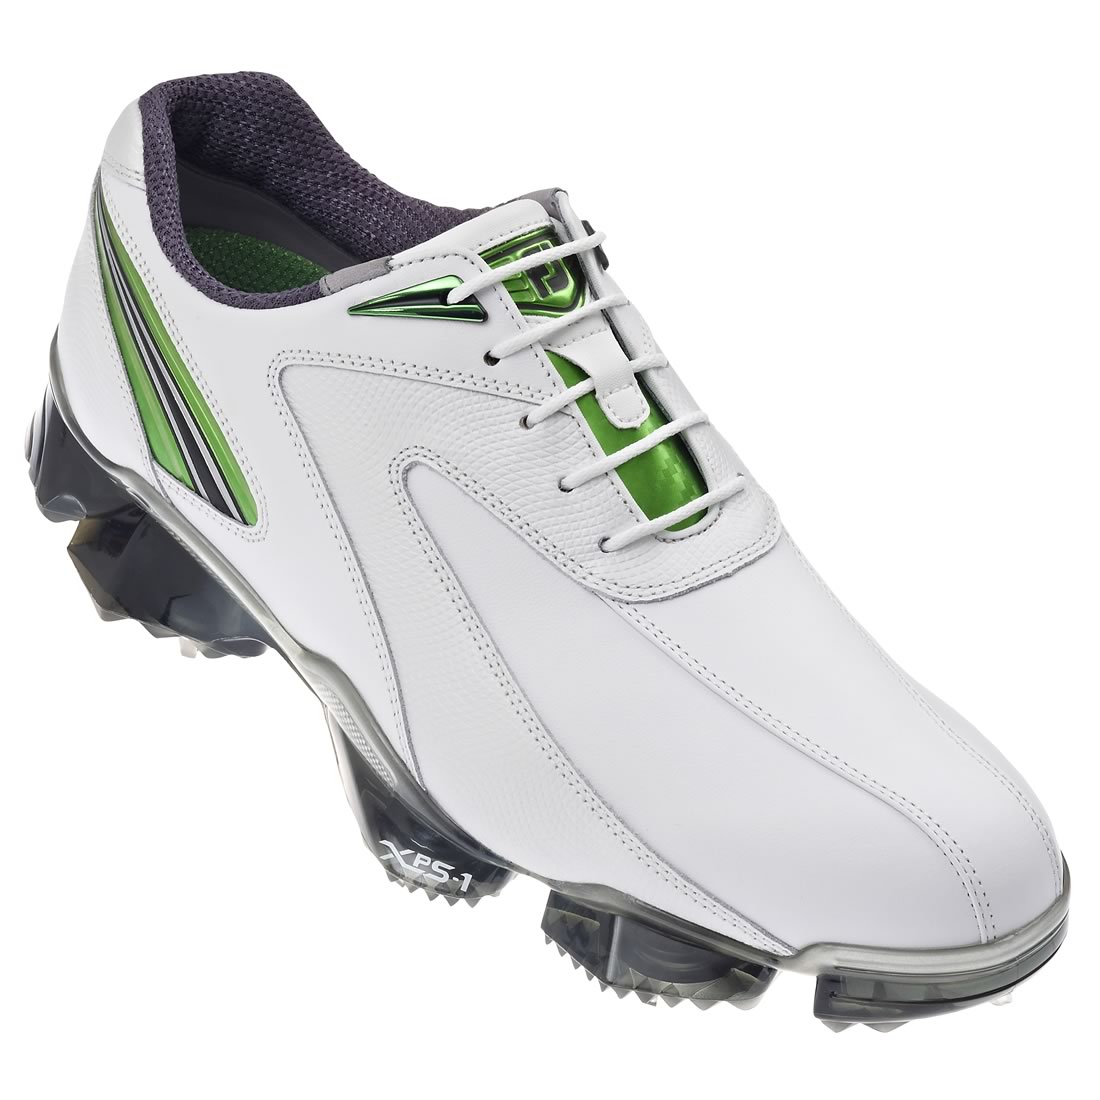 XPS Golf Shoes White/Green #56049